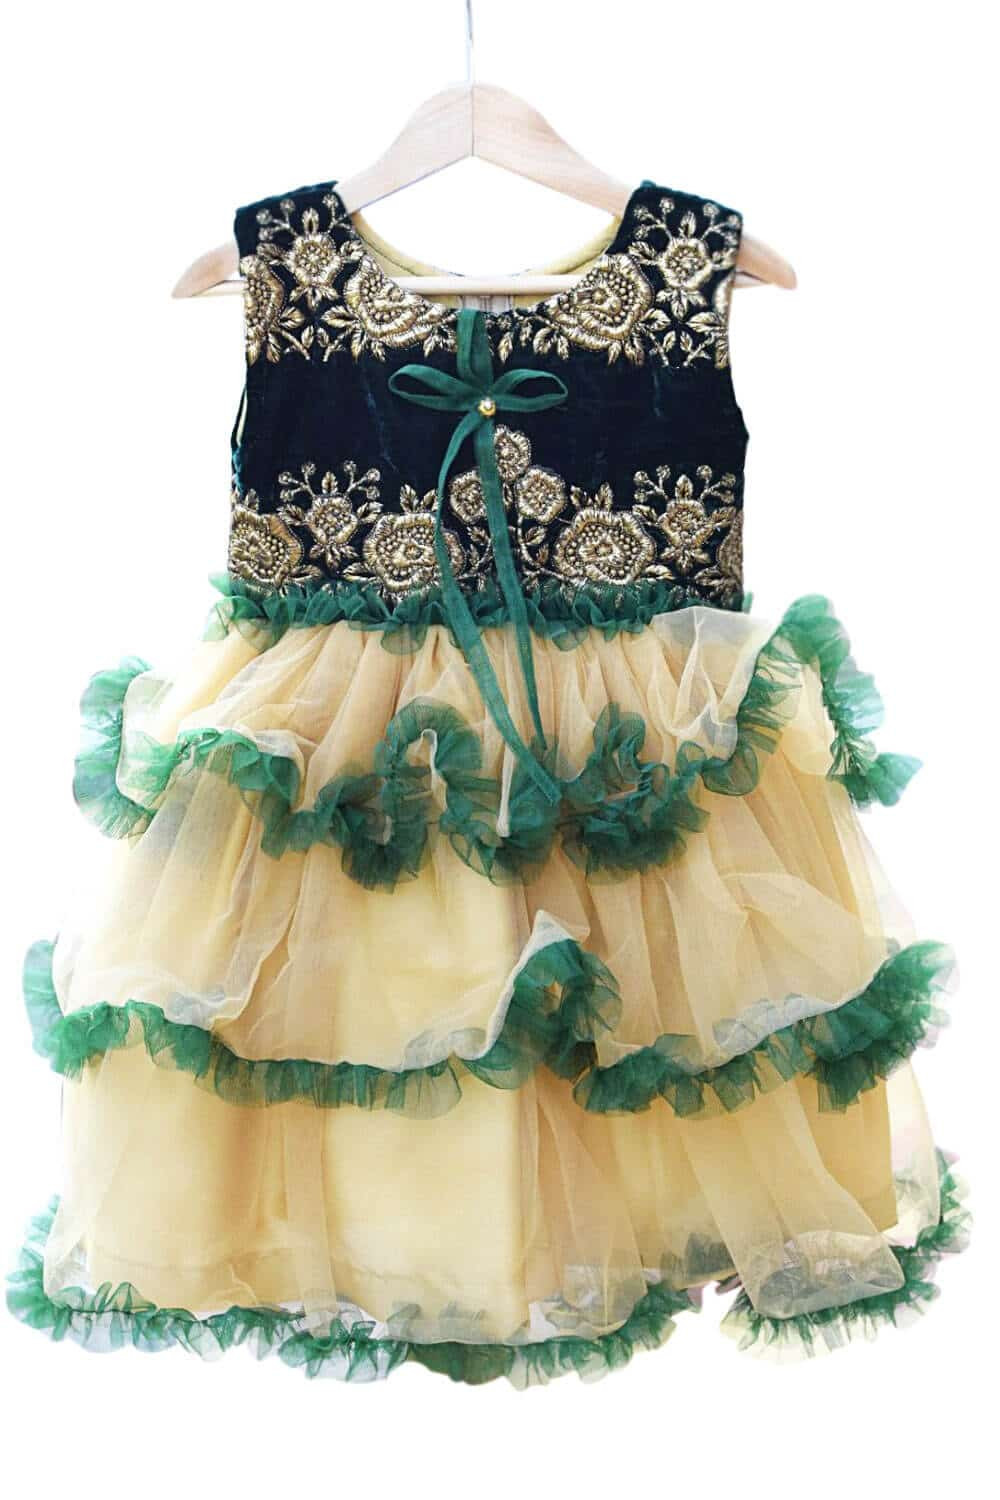 Baby Girl Dress Design
 7 Cutest Smashing Birthday Outfits 2016 For e Year Old